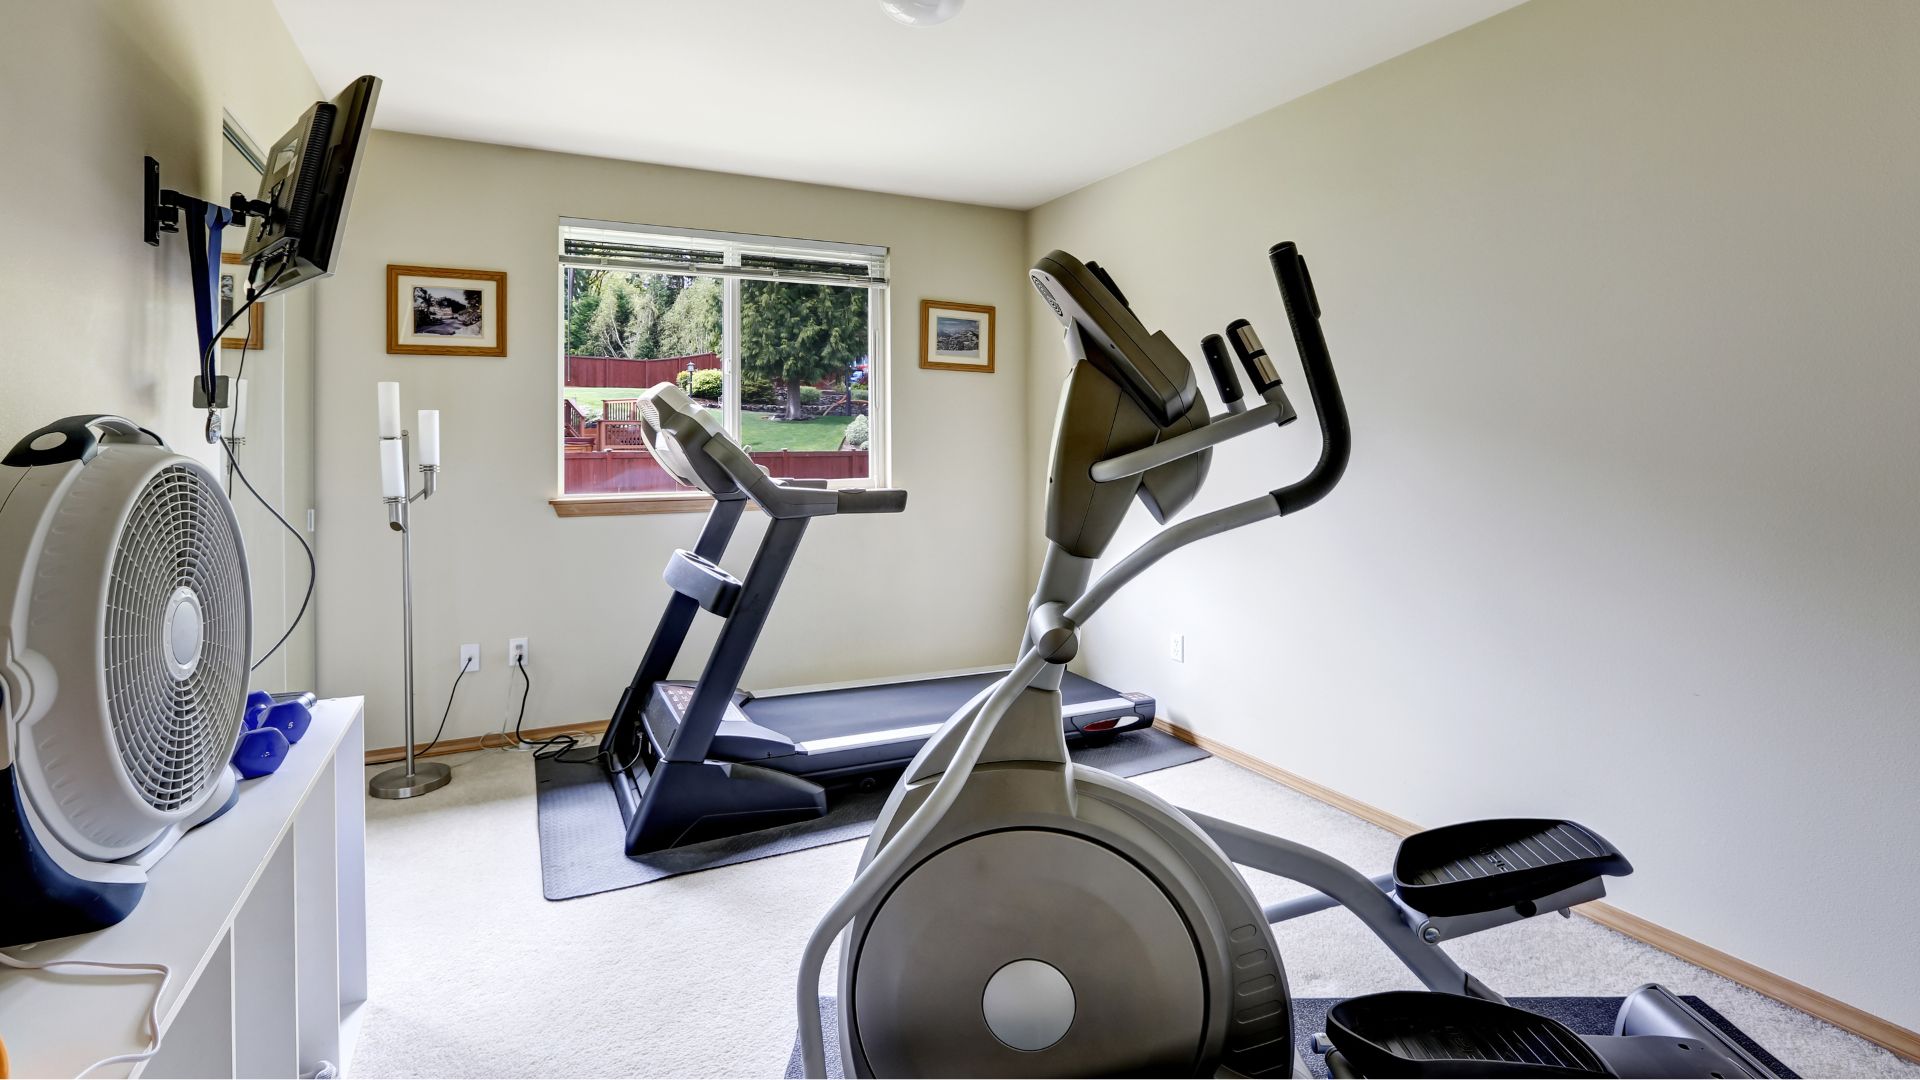 Small basement gym room with treadmill and elliptical bike